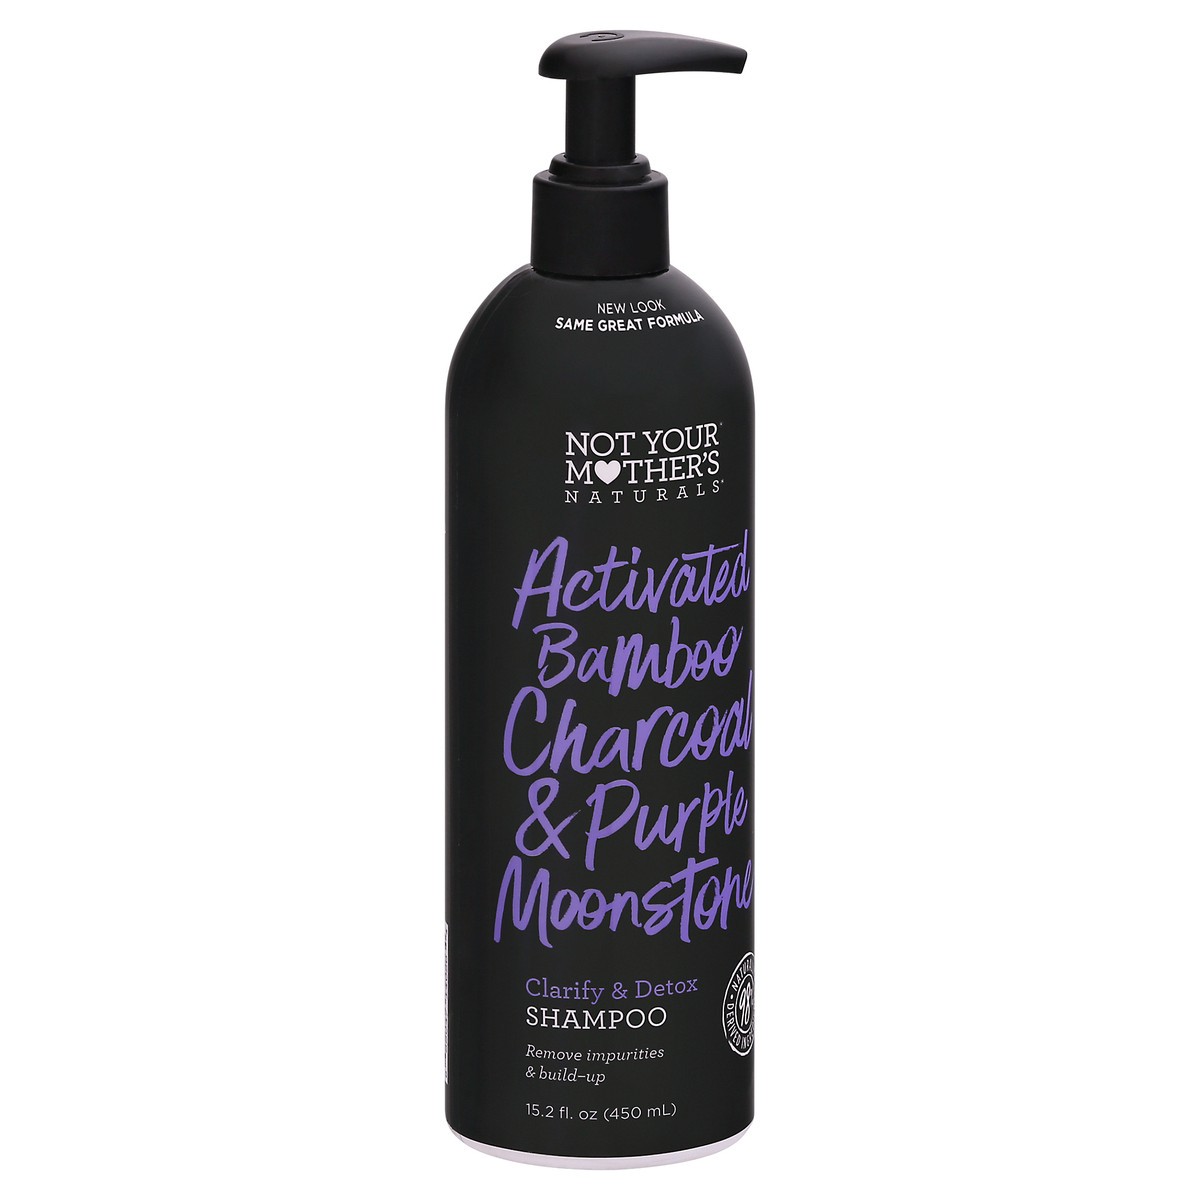 slide 11 of 12, Not Your Mother's Naturals Clarify & Detox Activated Bamboo Charcoal & Purple Moonstone Shampoo 15.2 fl oz Bottle, 15.20 fl oz